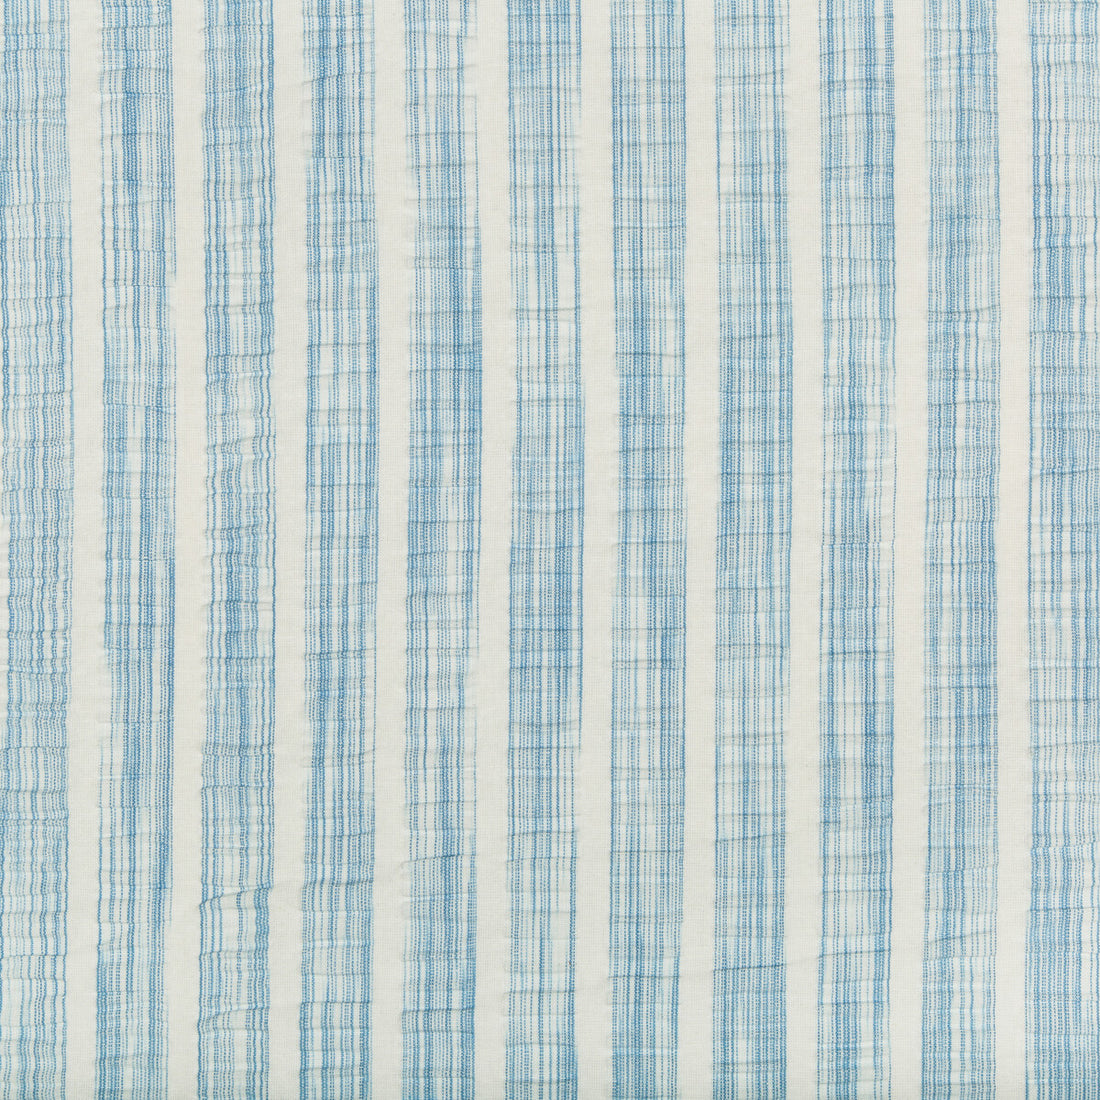 Parcevall fabric in indigo color - pattern 35298.5.0 - by Kravet Basics in the Bermuda collection